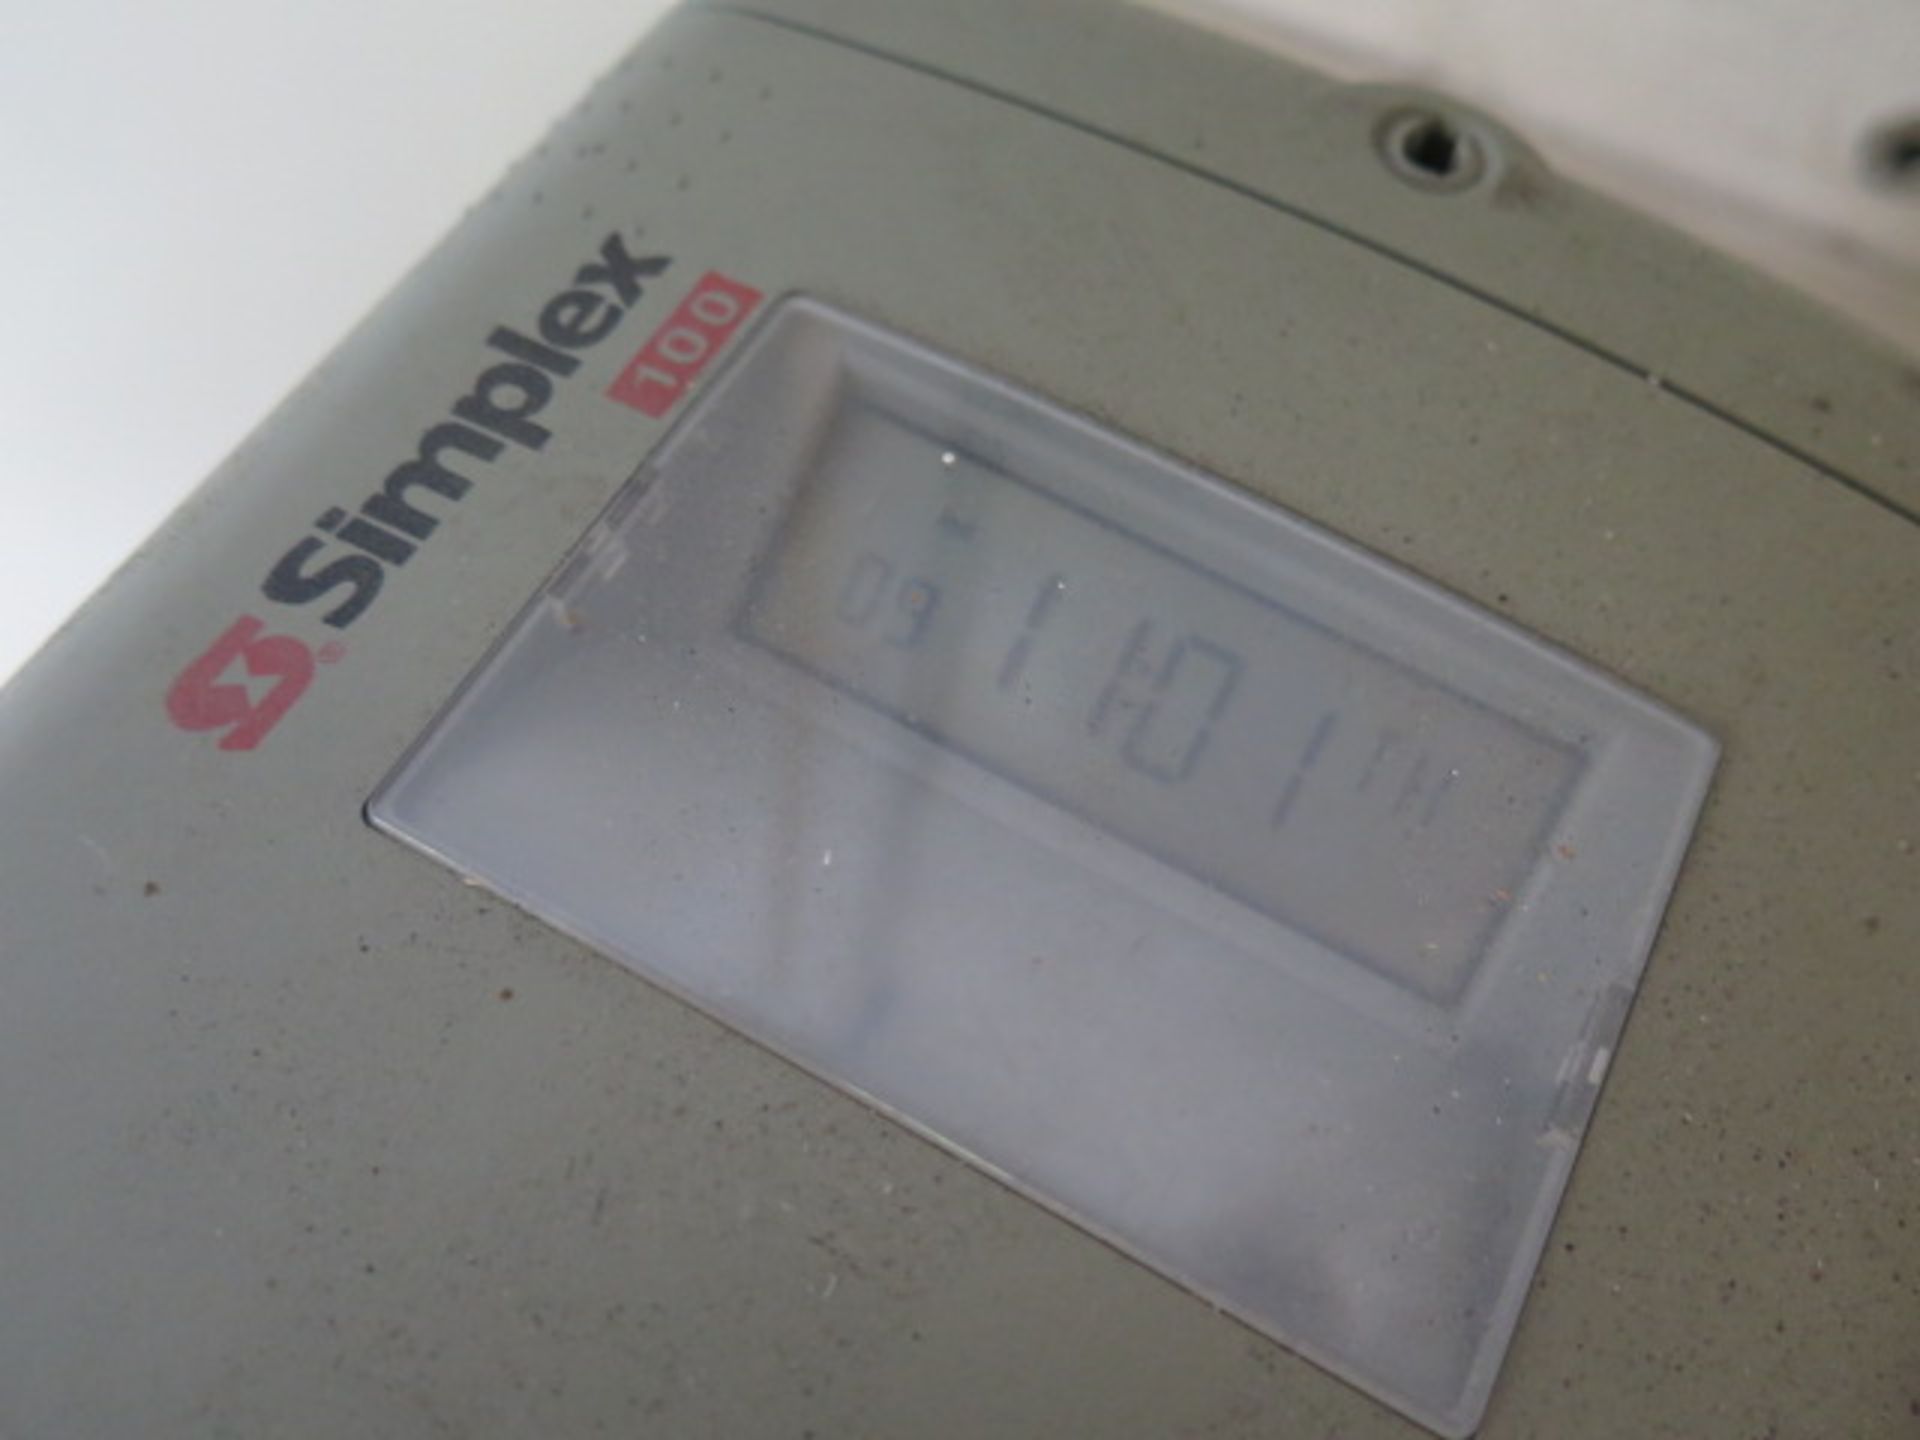 Simplex mdl. 100 Digital Time Clock and Card Rack (SOLD AS-IS - NO WARRANTY) - Image 2 of 2